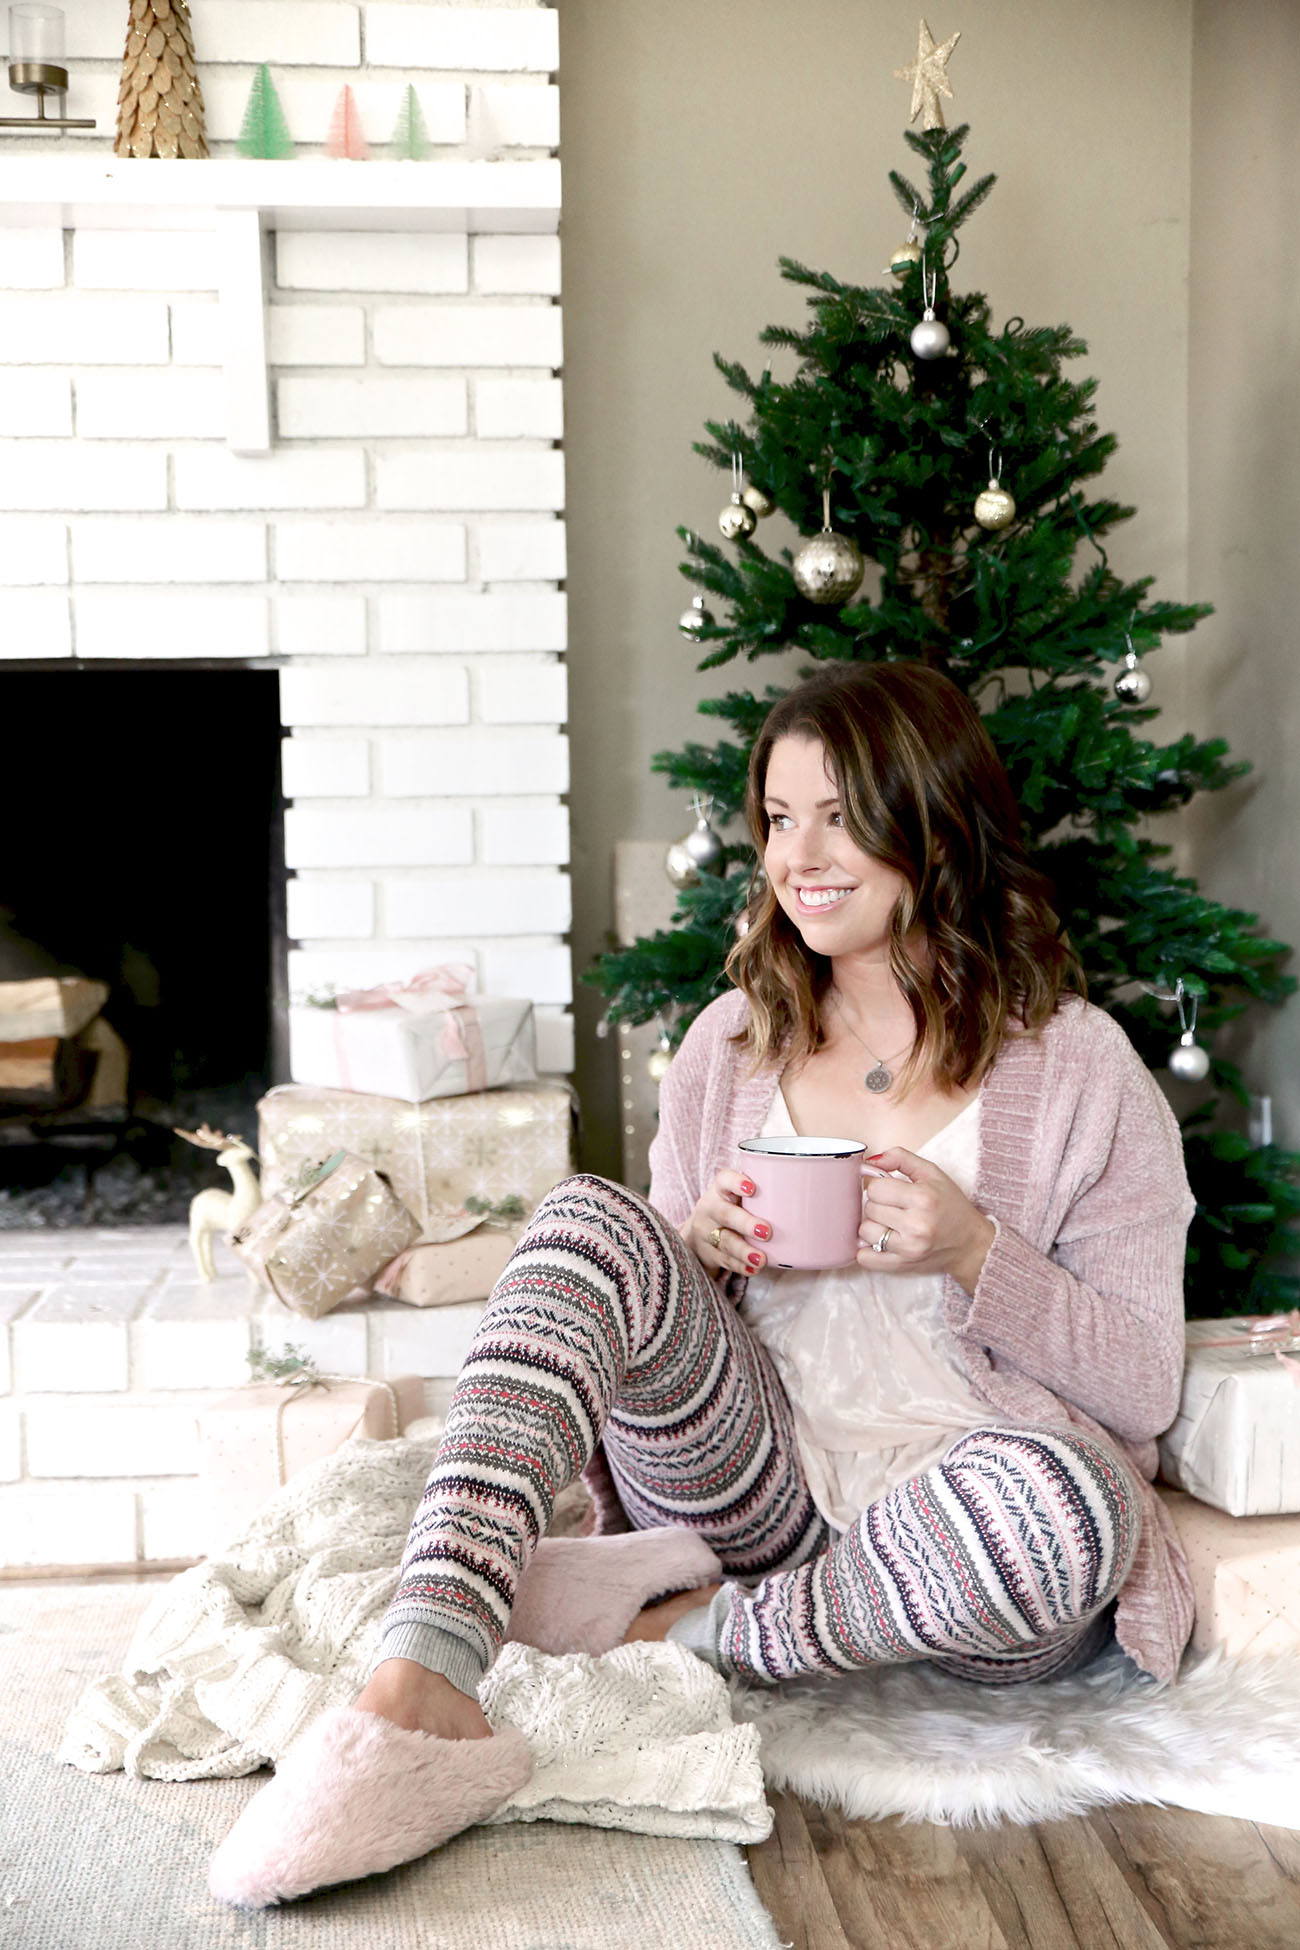 Glitter Guide x American Eagle Boho Glam Holiday Christmas Pink Chenille Sweater Branding Styling Photographer